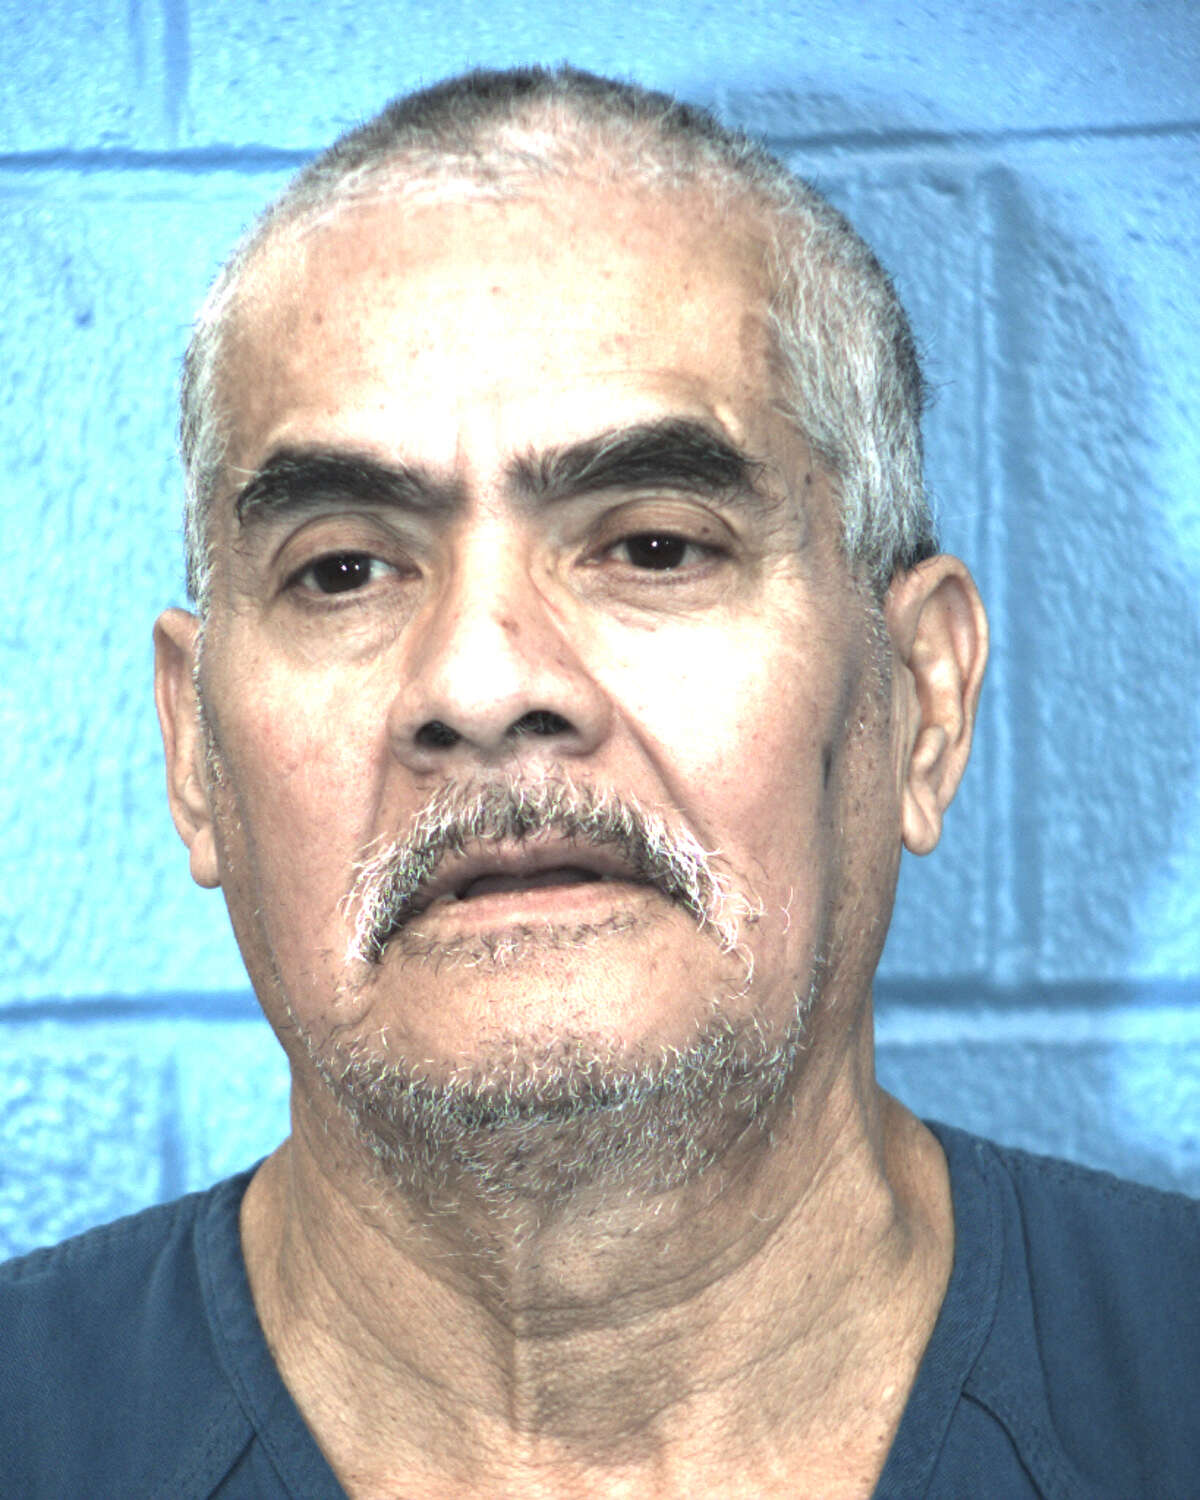 Raul Martinez, 65, was charged with intoxication assault causing serious bodily injury.